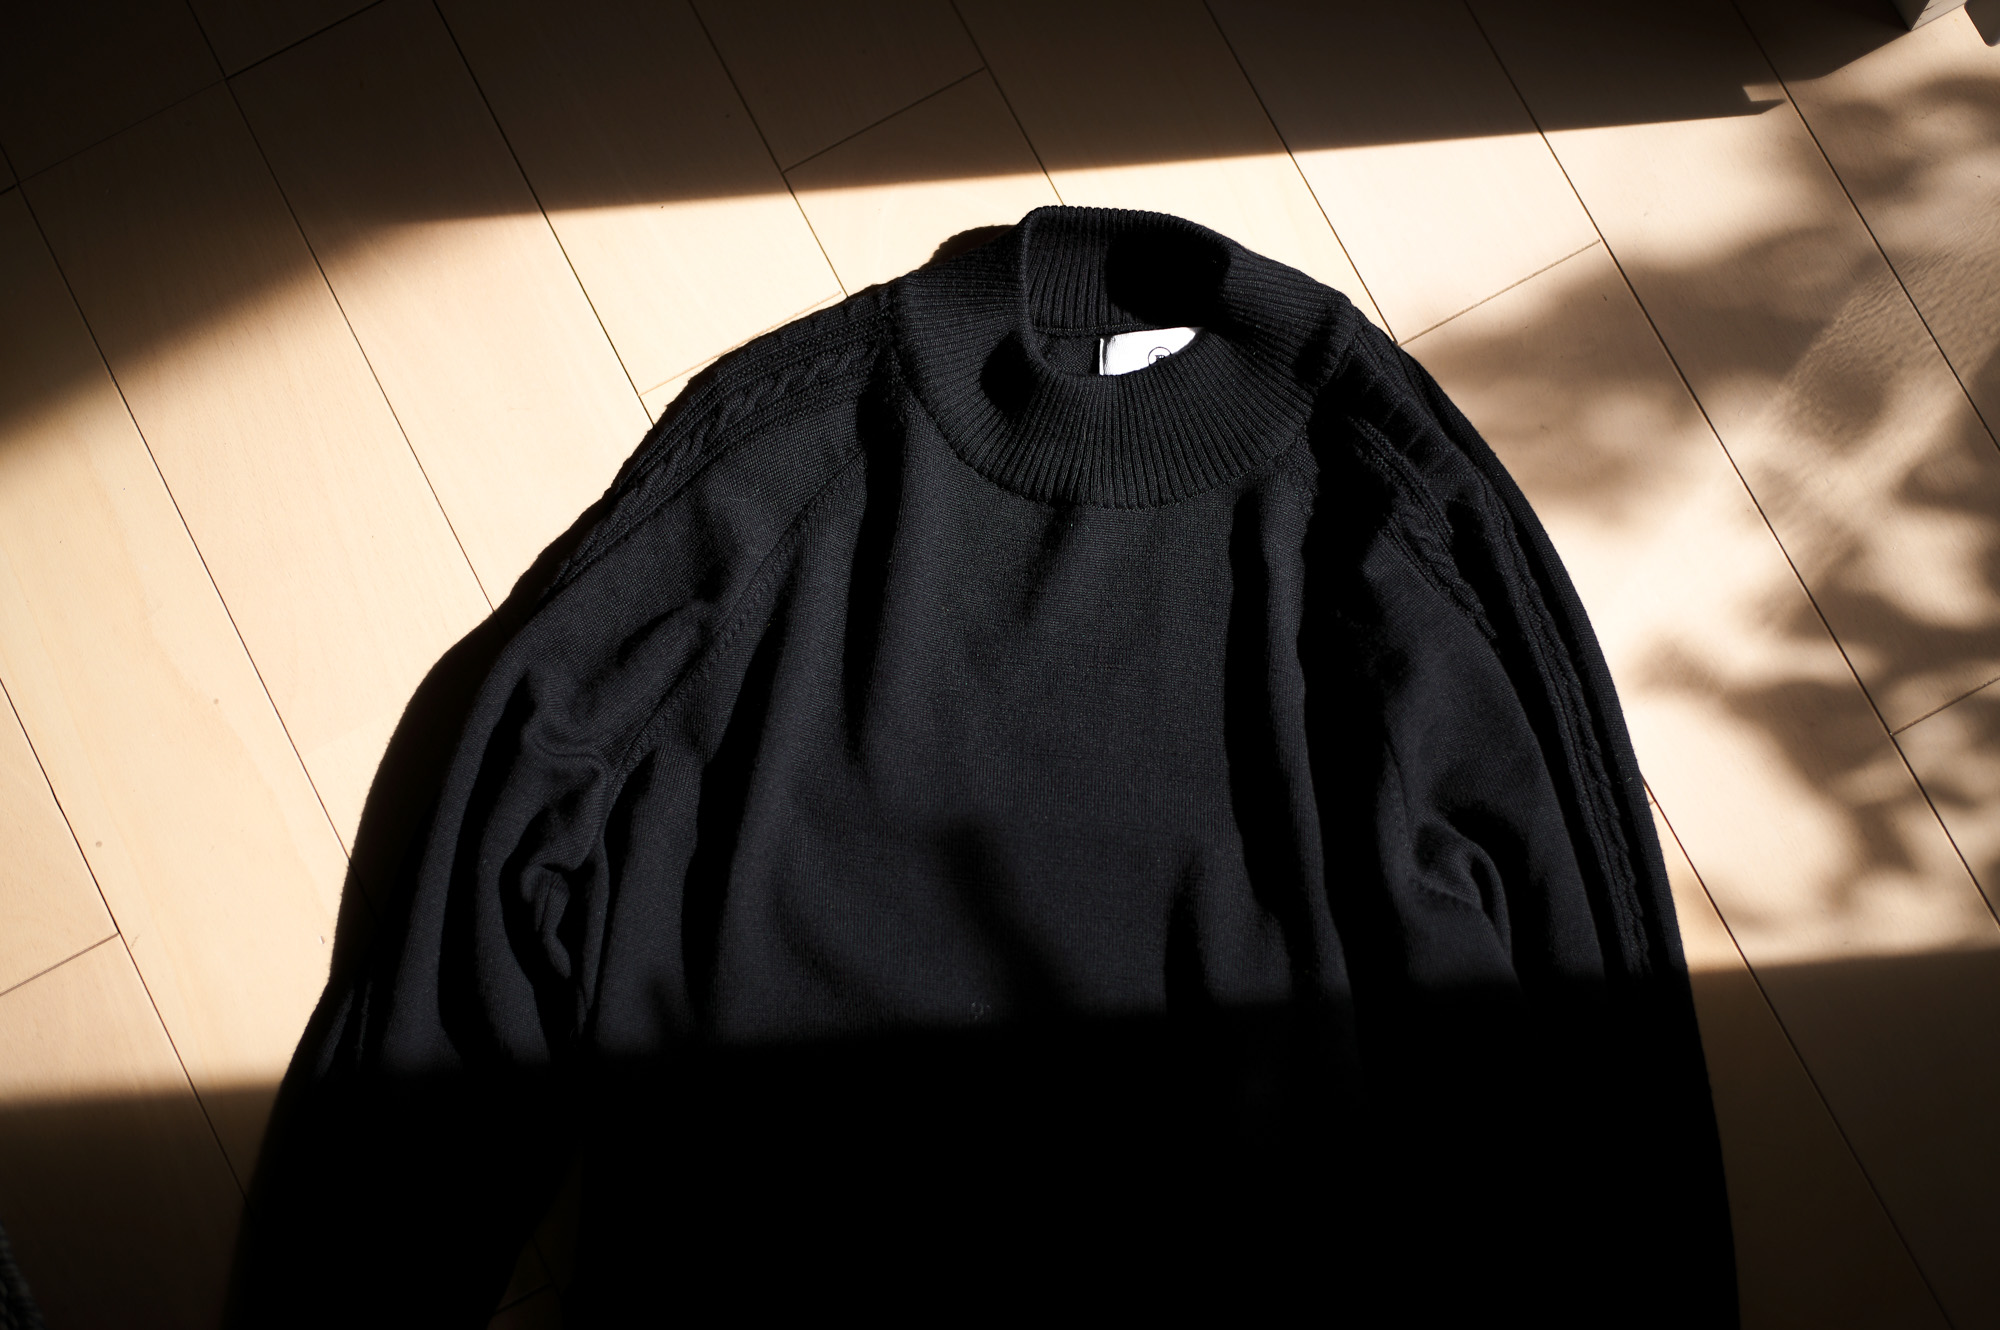 RIVORA / リヴォラ (2023 秋冬 展示会) 愛知 名古屋 Alto e Diritto altoediritto アルトエデリット SIDE CABLE Mock Neck Pull Over Black Gray Khaki 18G Wool Silk Crew Neck Pull Over Blue Red Yellow Black 18G Wool Silk Turtle Neck Pull Over Blue Red Yellow Black Wool Knit hoodie Black White Wool Knit Full Zip Parka Black